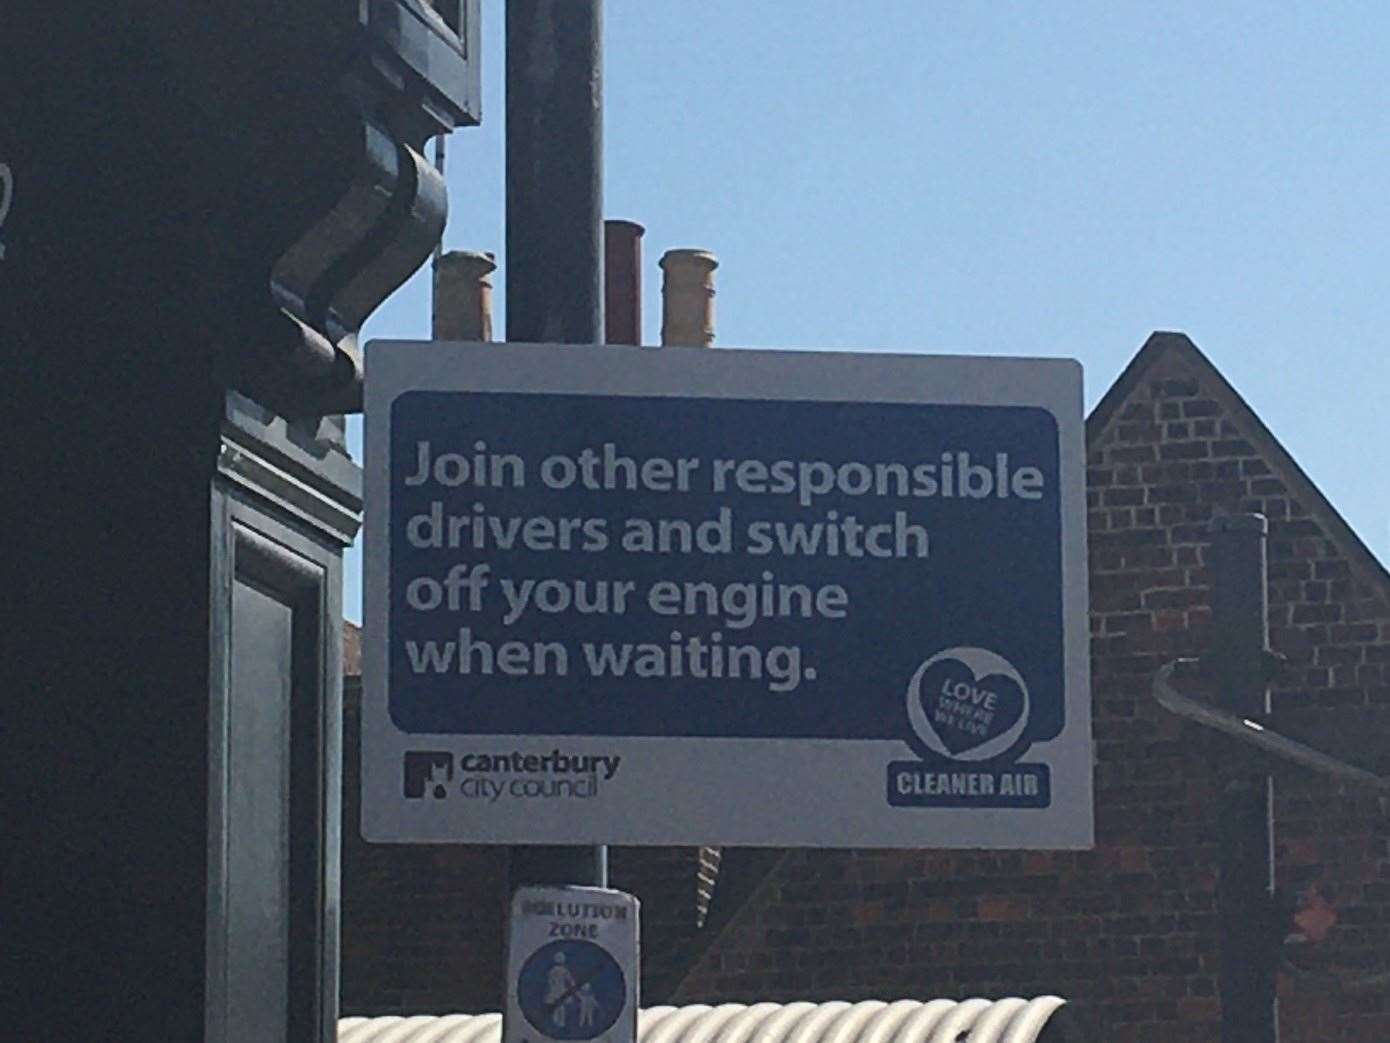 One of the signs in place in Canterbury. Picture: The University of Kent